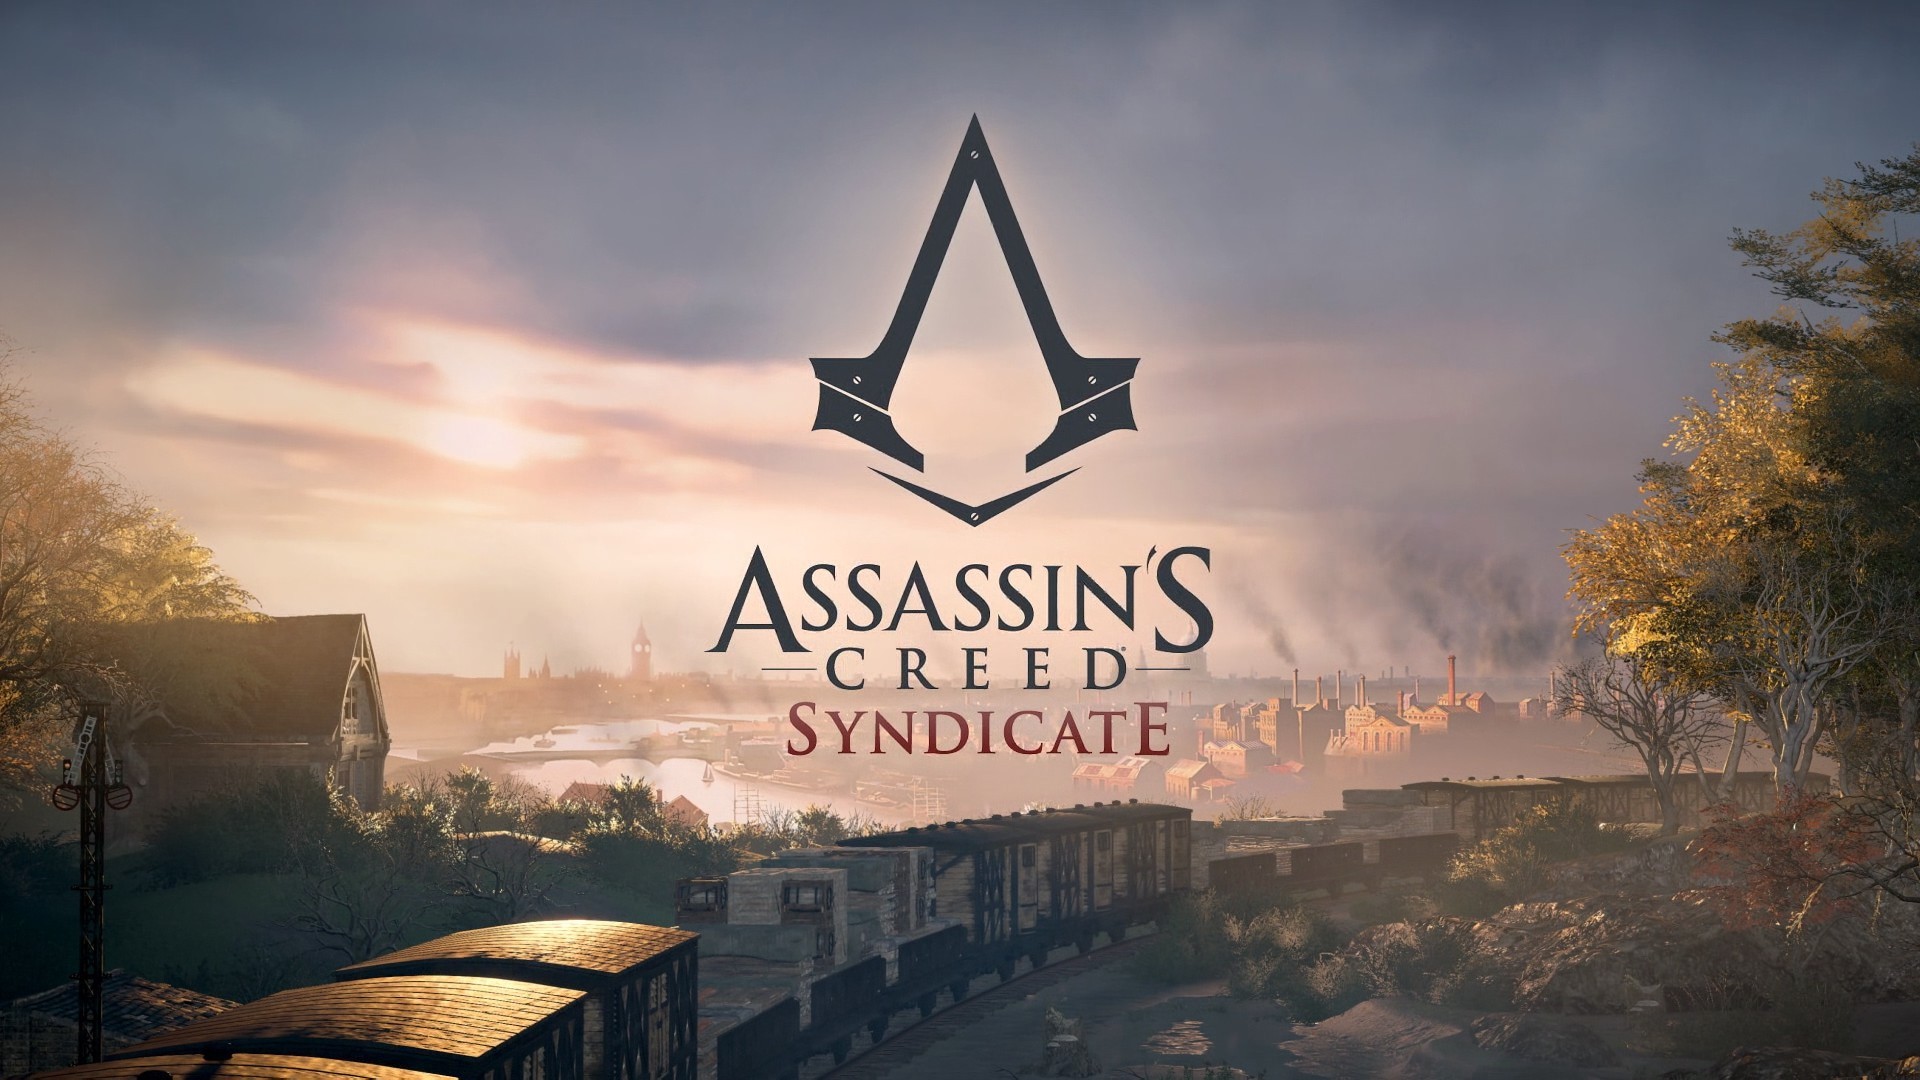 General 1920x1080 Assassin's Creed Assassin's Creed Syndicate video games PC gaming logo